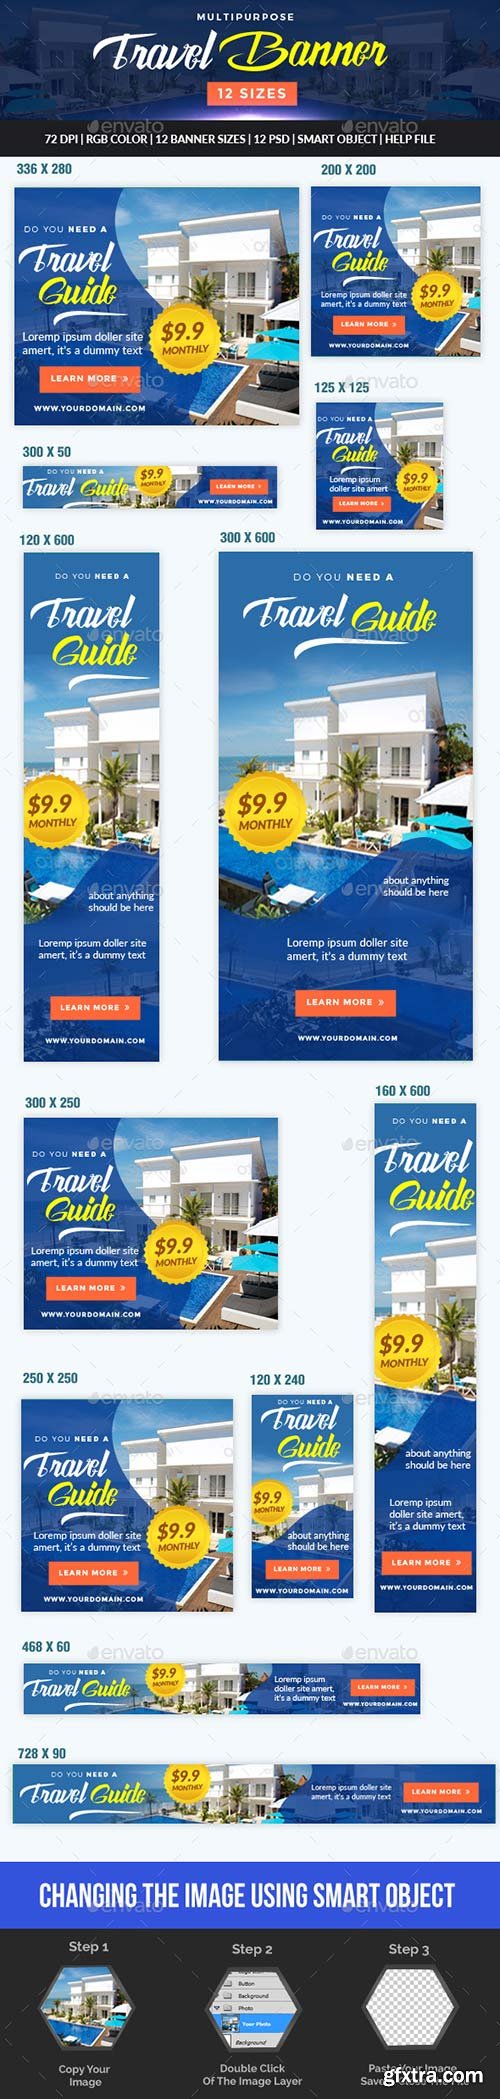 Graphicriver - Multipurpose Travel and Hotel Banner 17537951